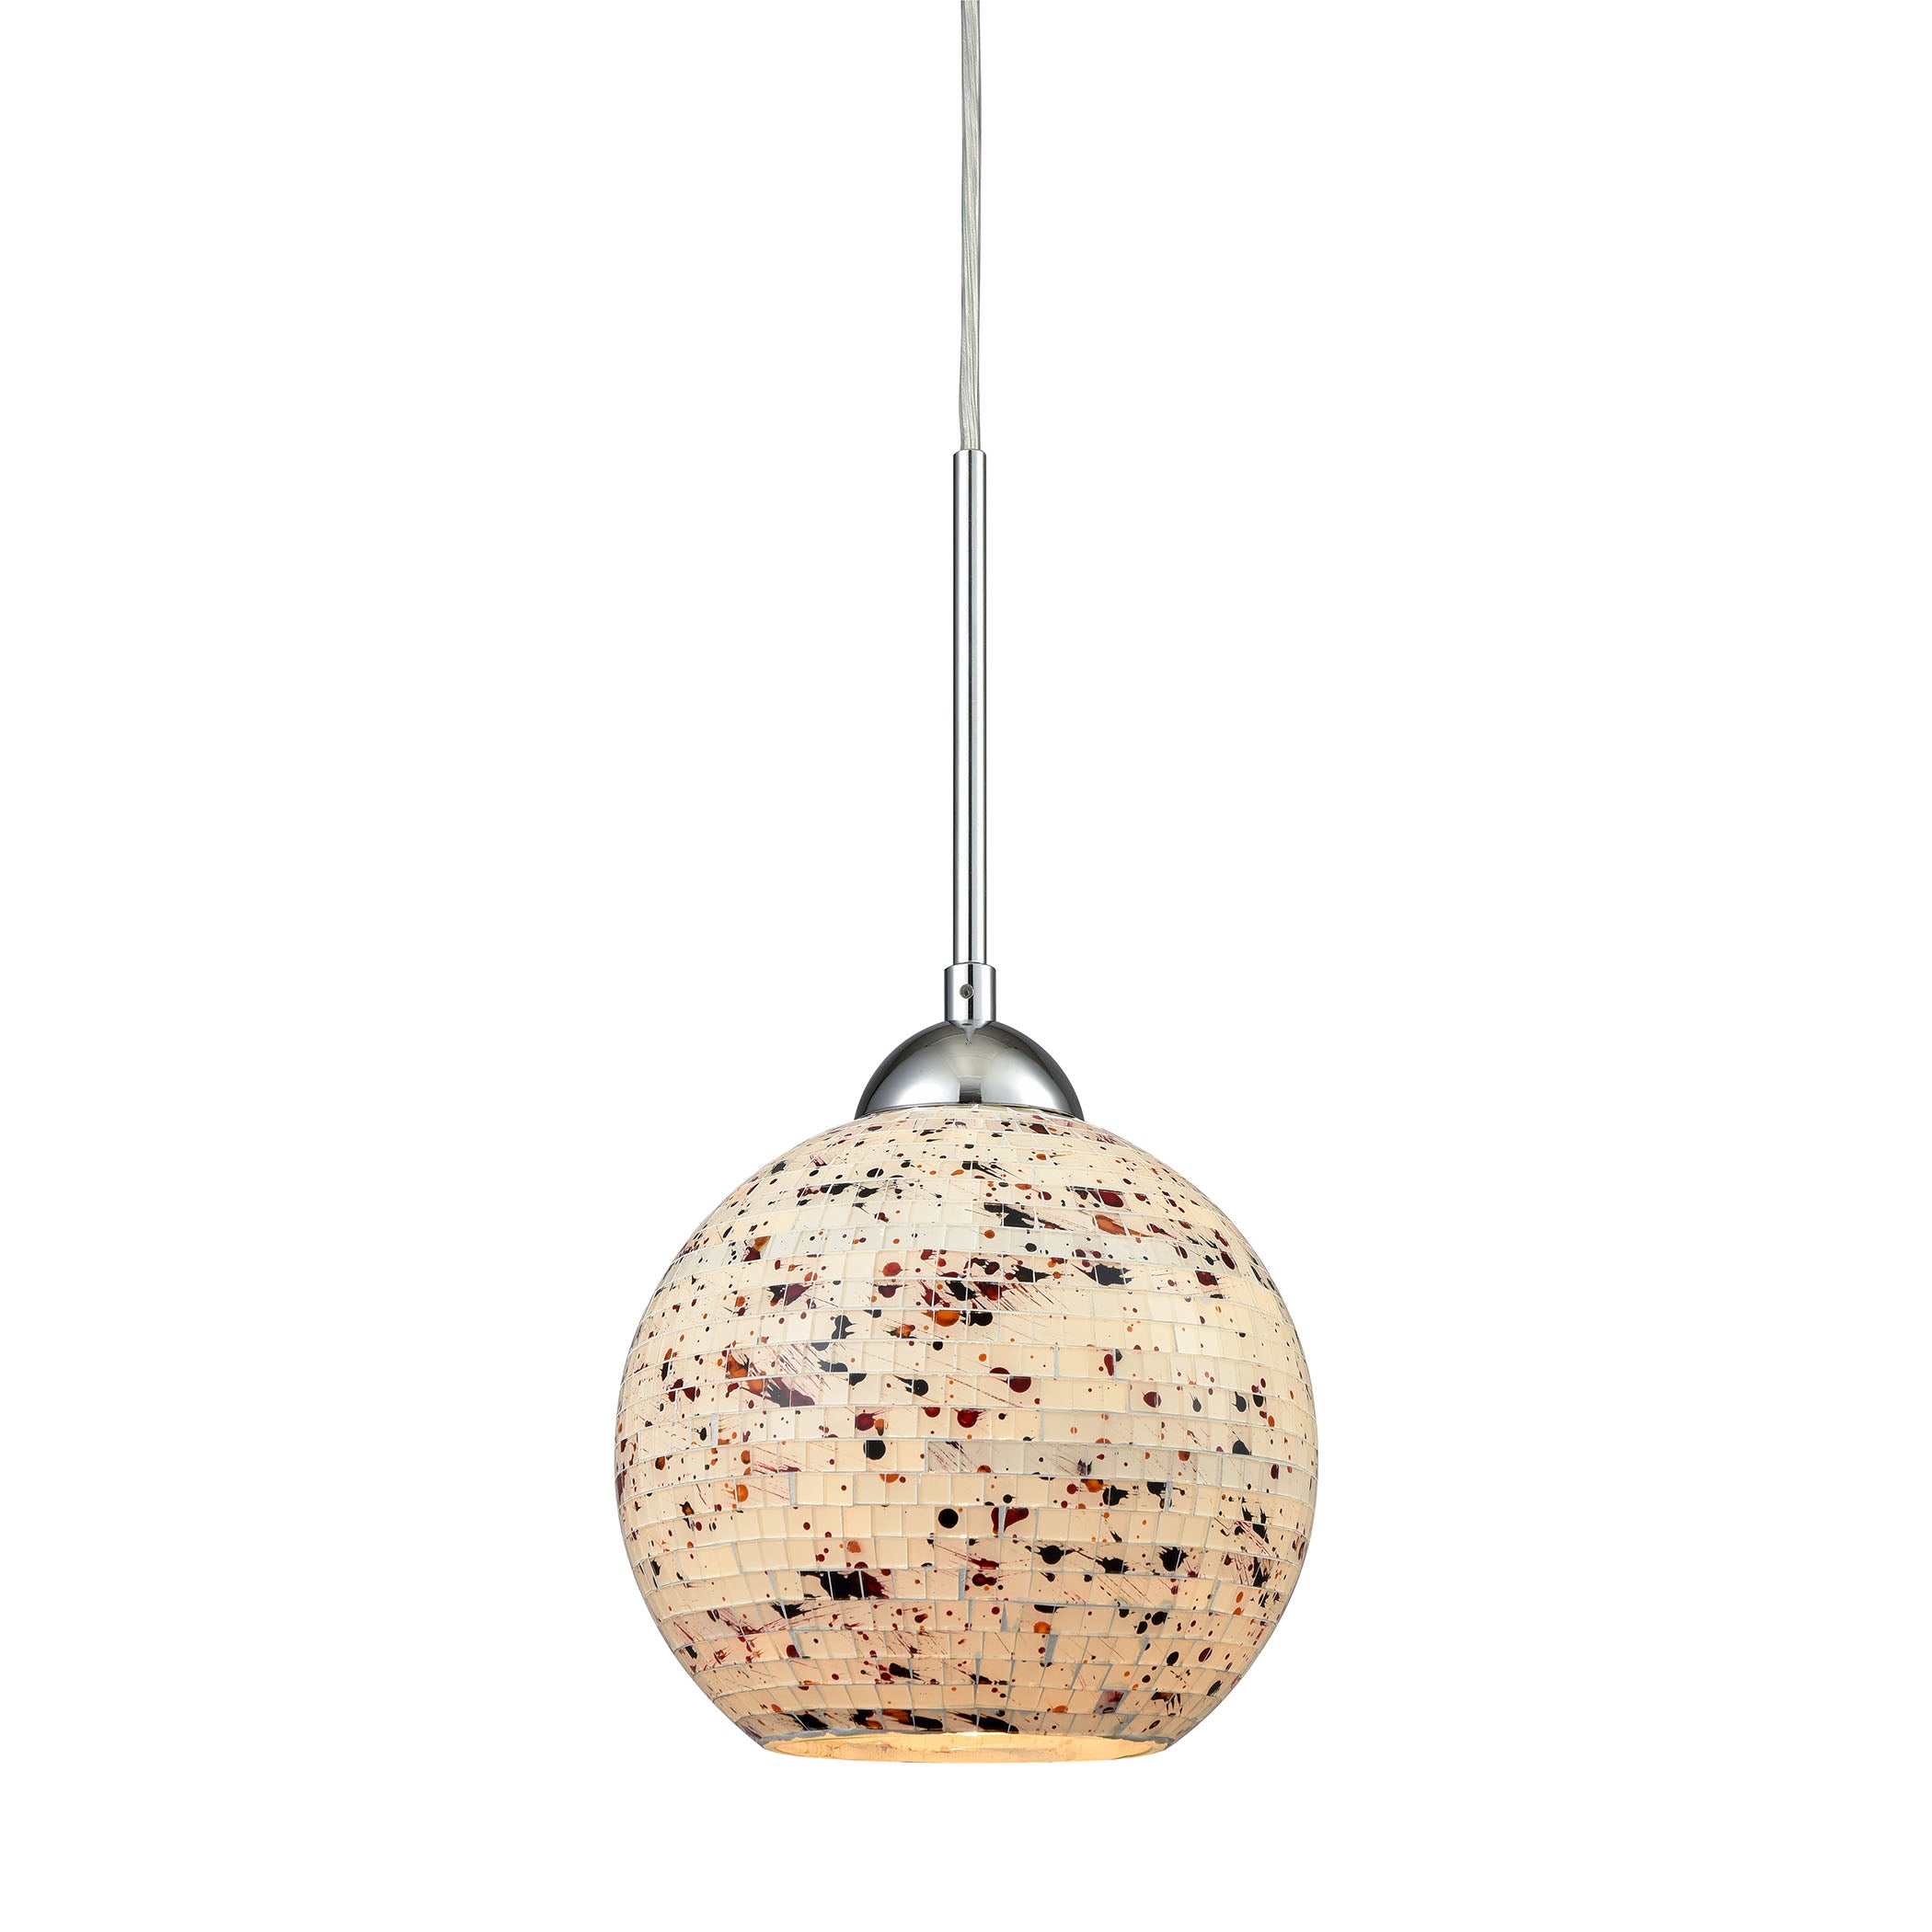 ELK Lighting 10741/1 Spatter 1-Light Mini Pendant in Polished Chrome with Spatter Mosaic Glass